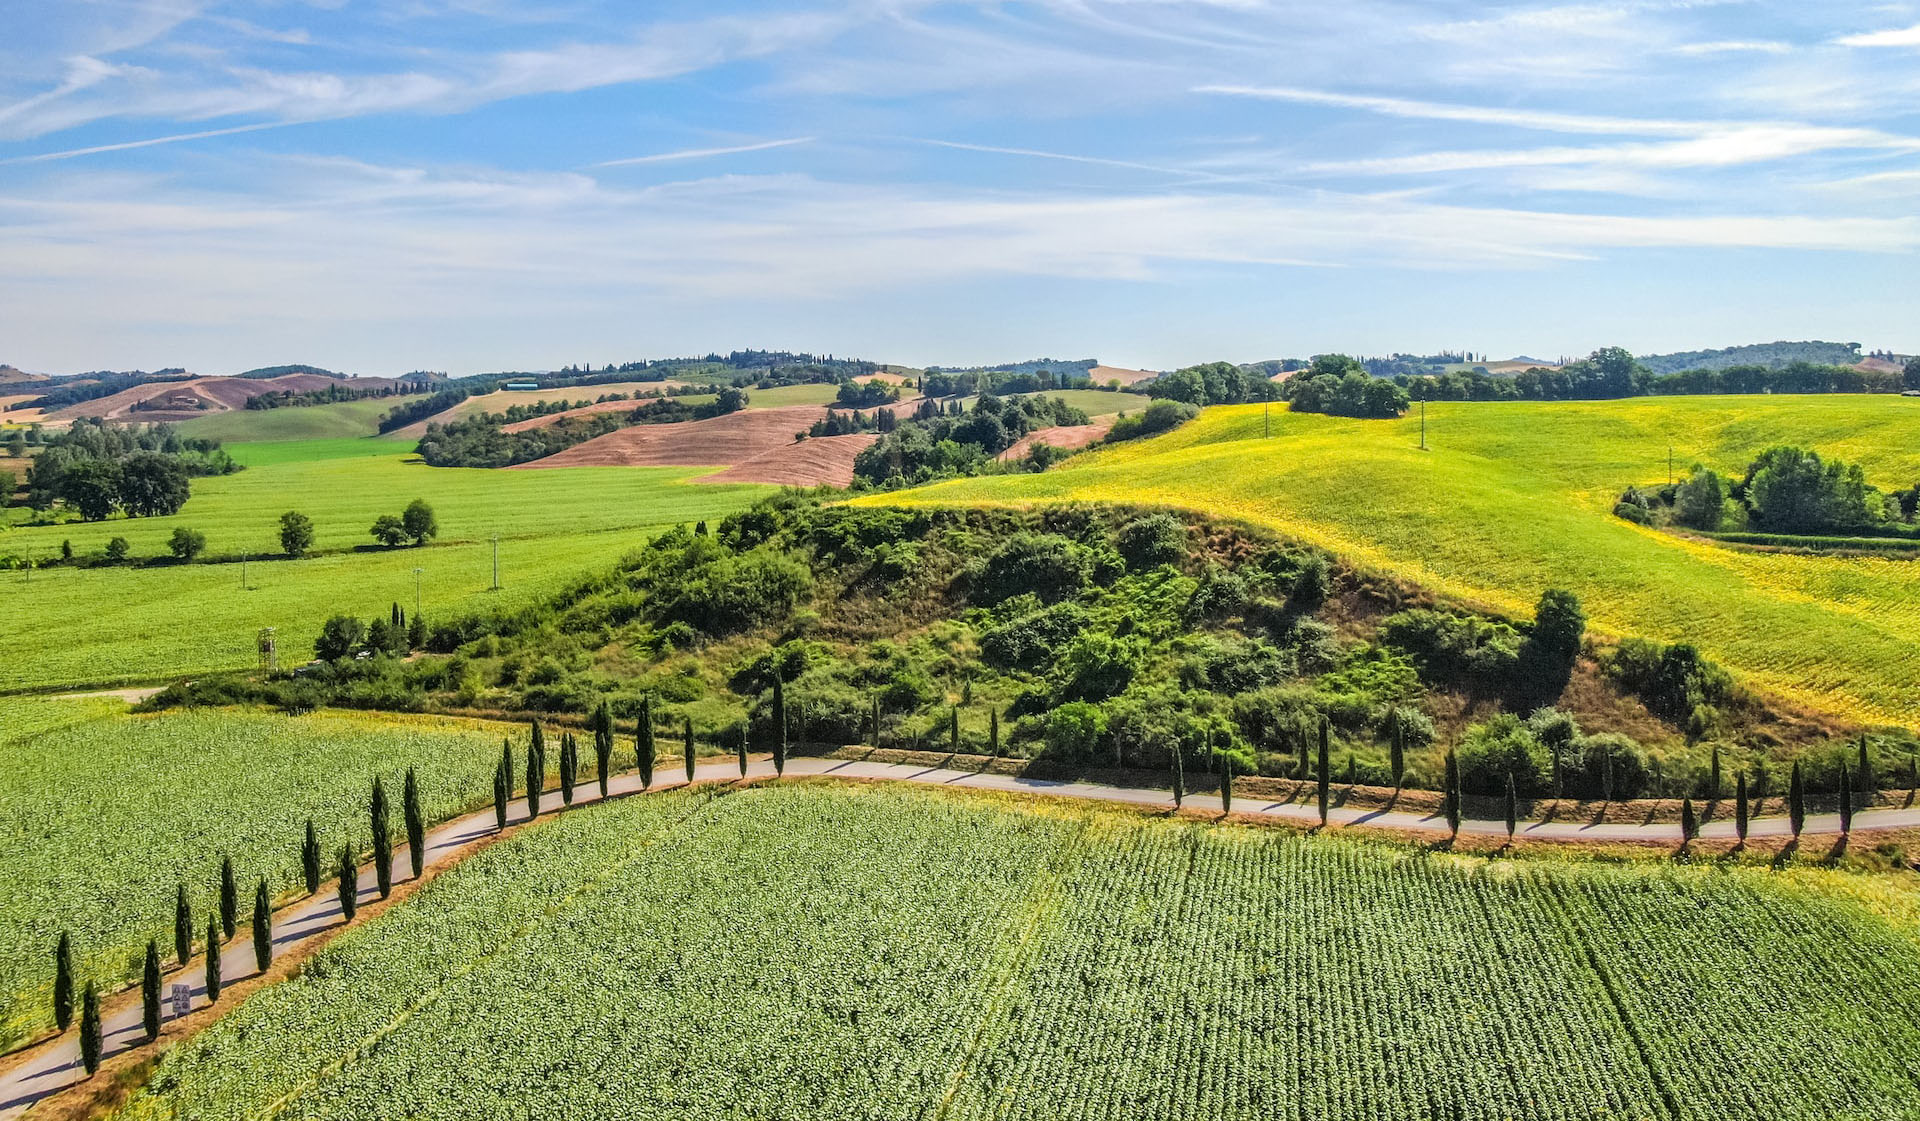 The rolling hills of Tuscany in Strade Bianche